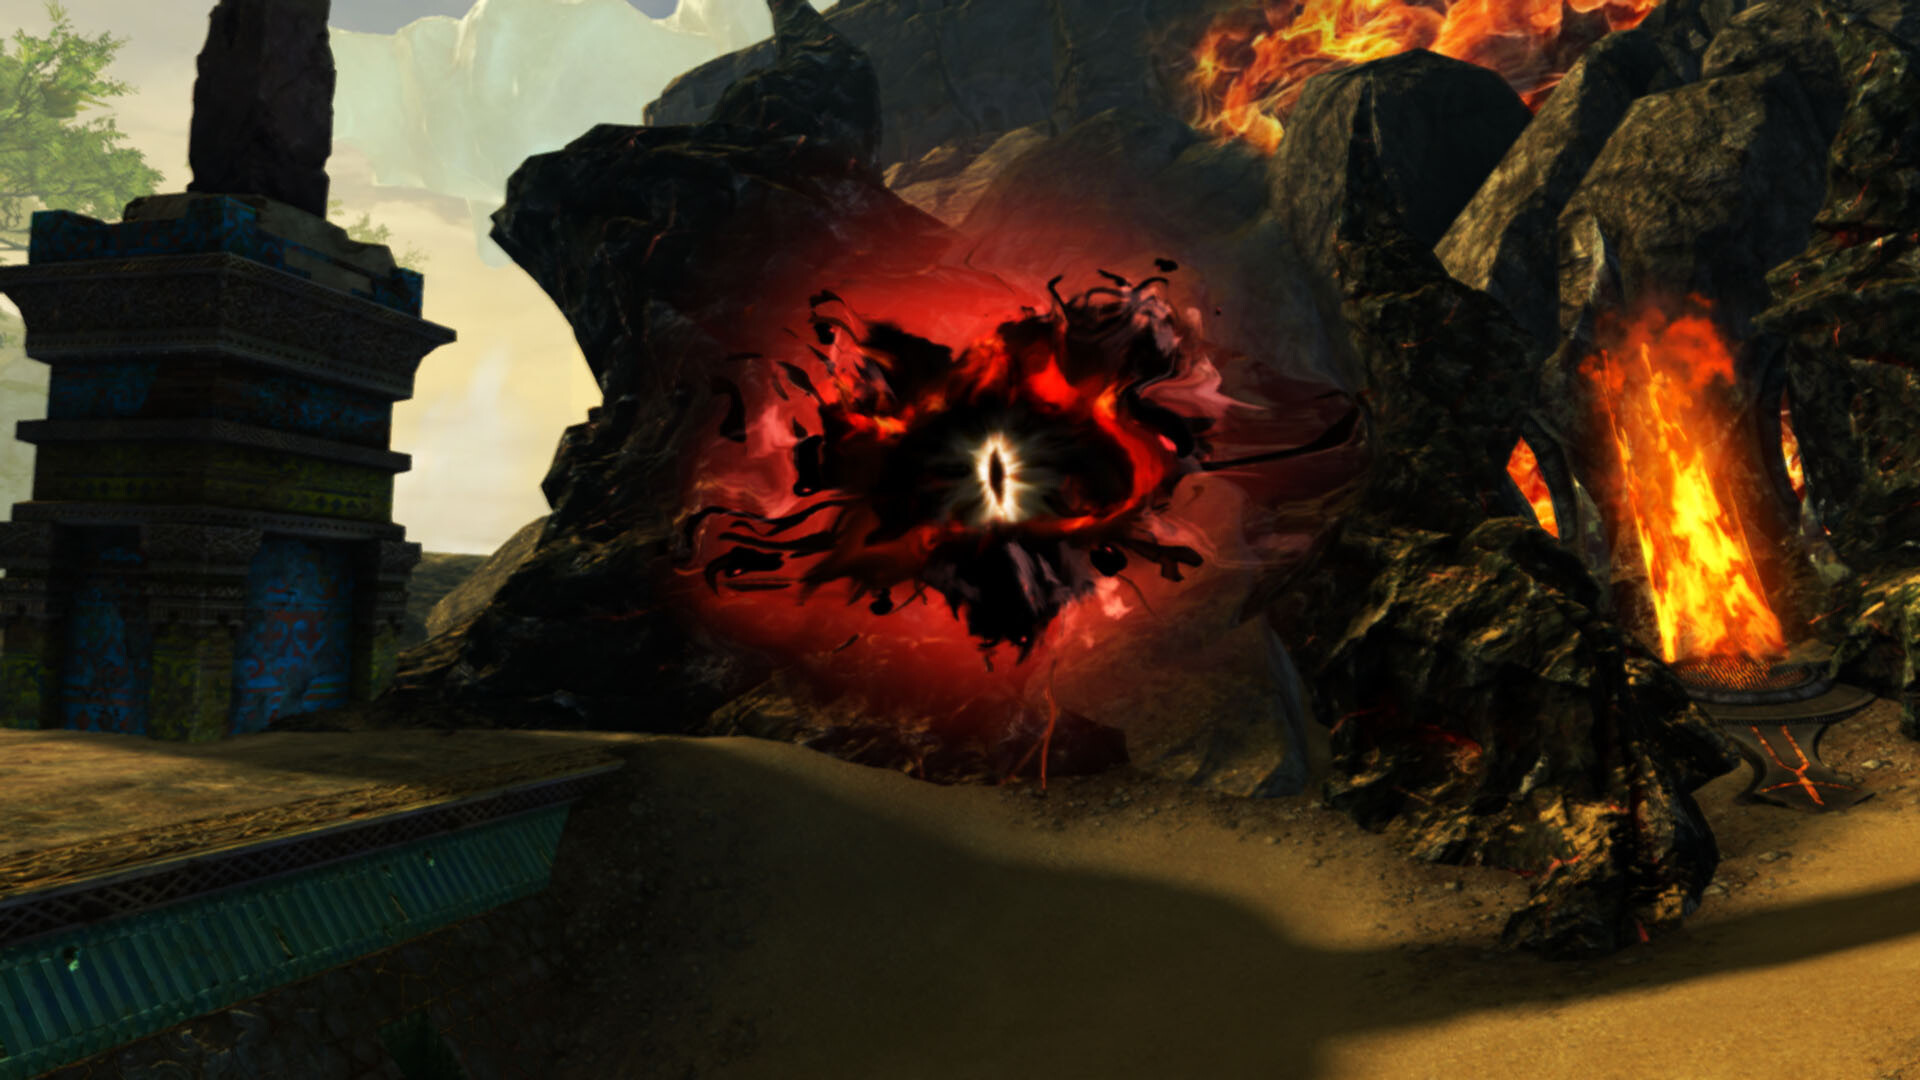 Guild Wars 2: Secrets of the Obscure – A New Horizon for MMO Gaming -  Glorious Gaming